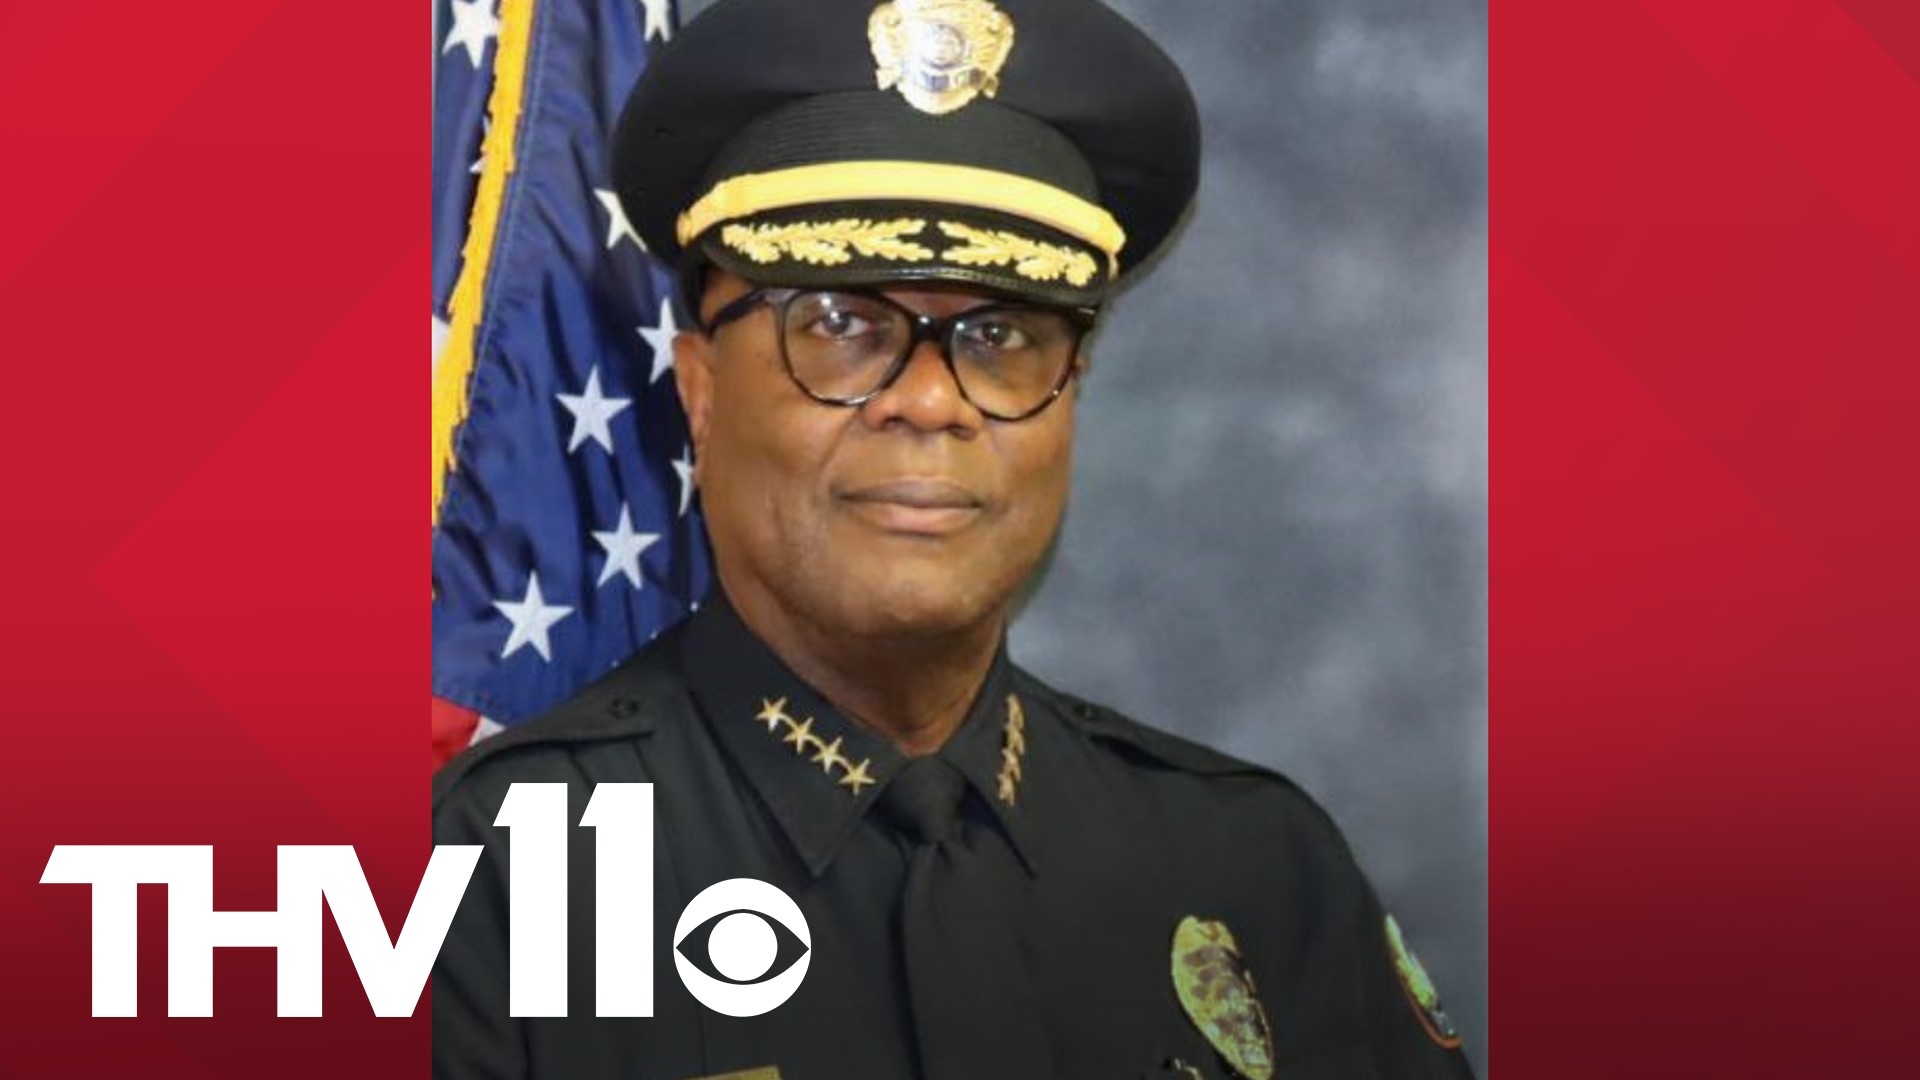 Little Rock Police Chief Keith Humphrey remains on administrative leave after a shooting on New Year's Eve. The chief was helping patrol for the holiday.